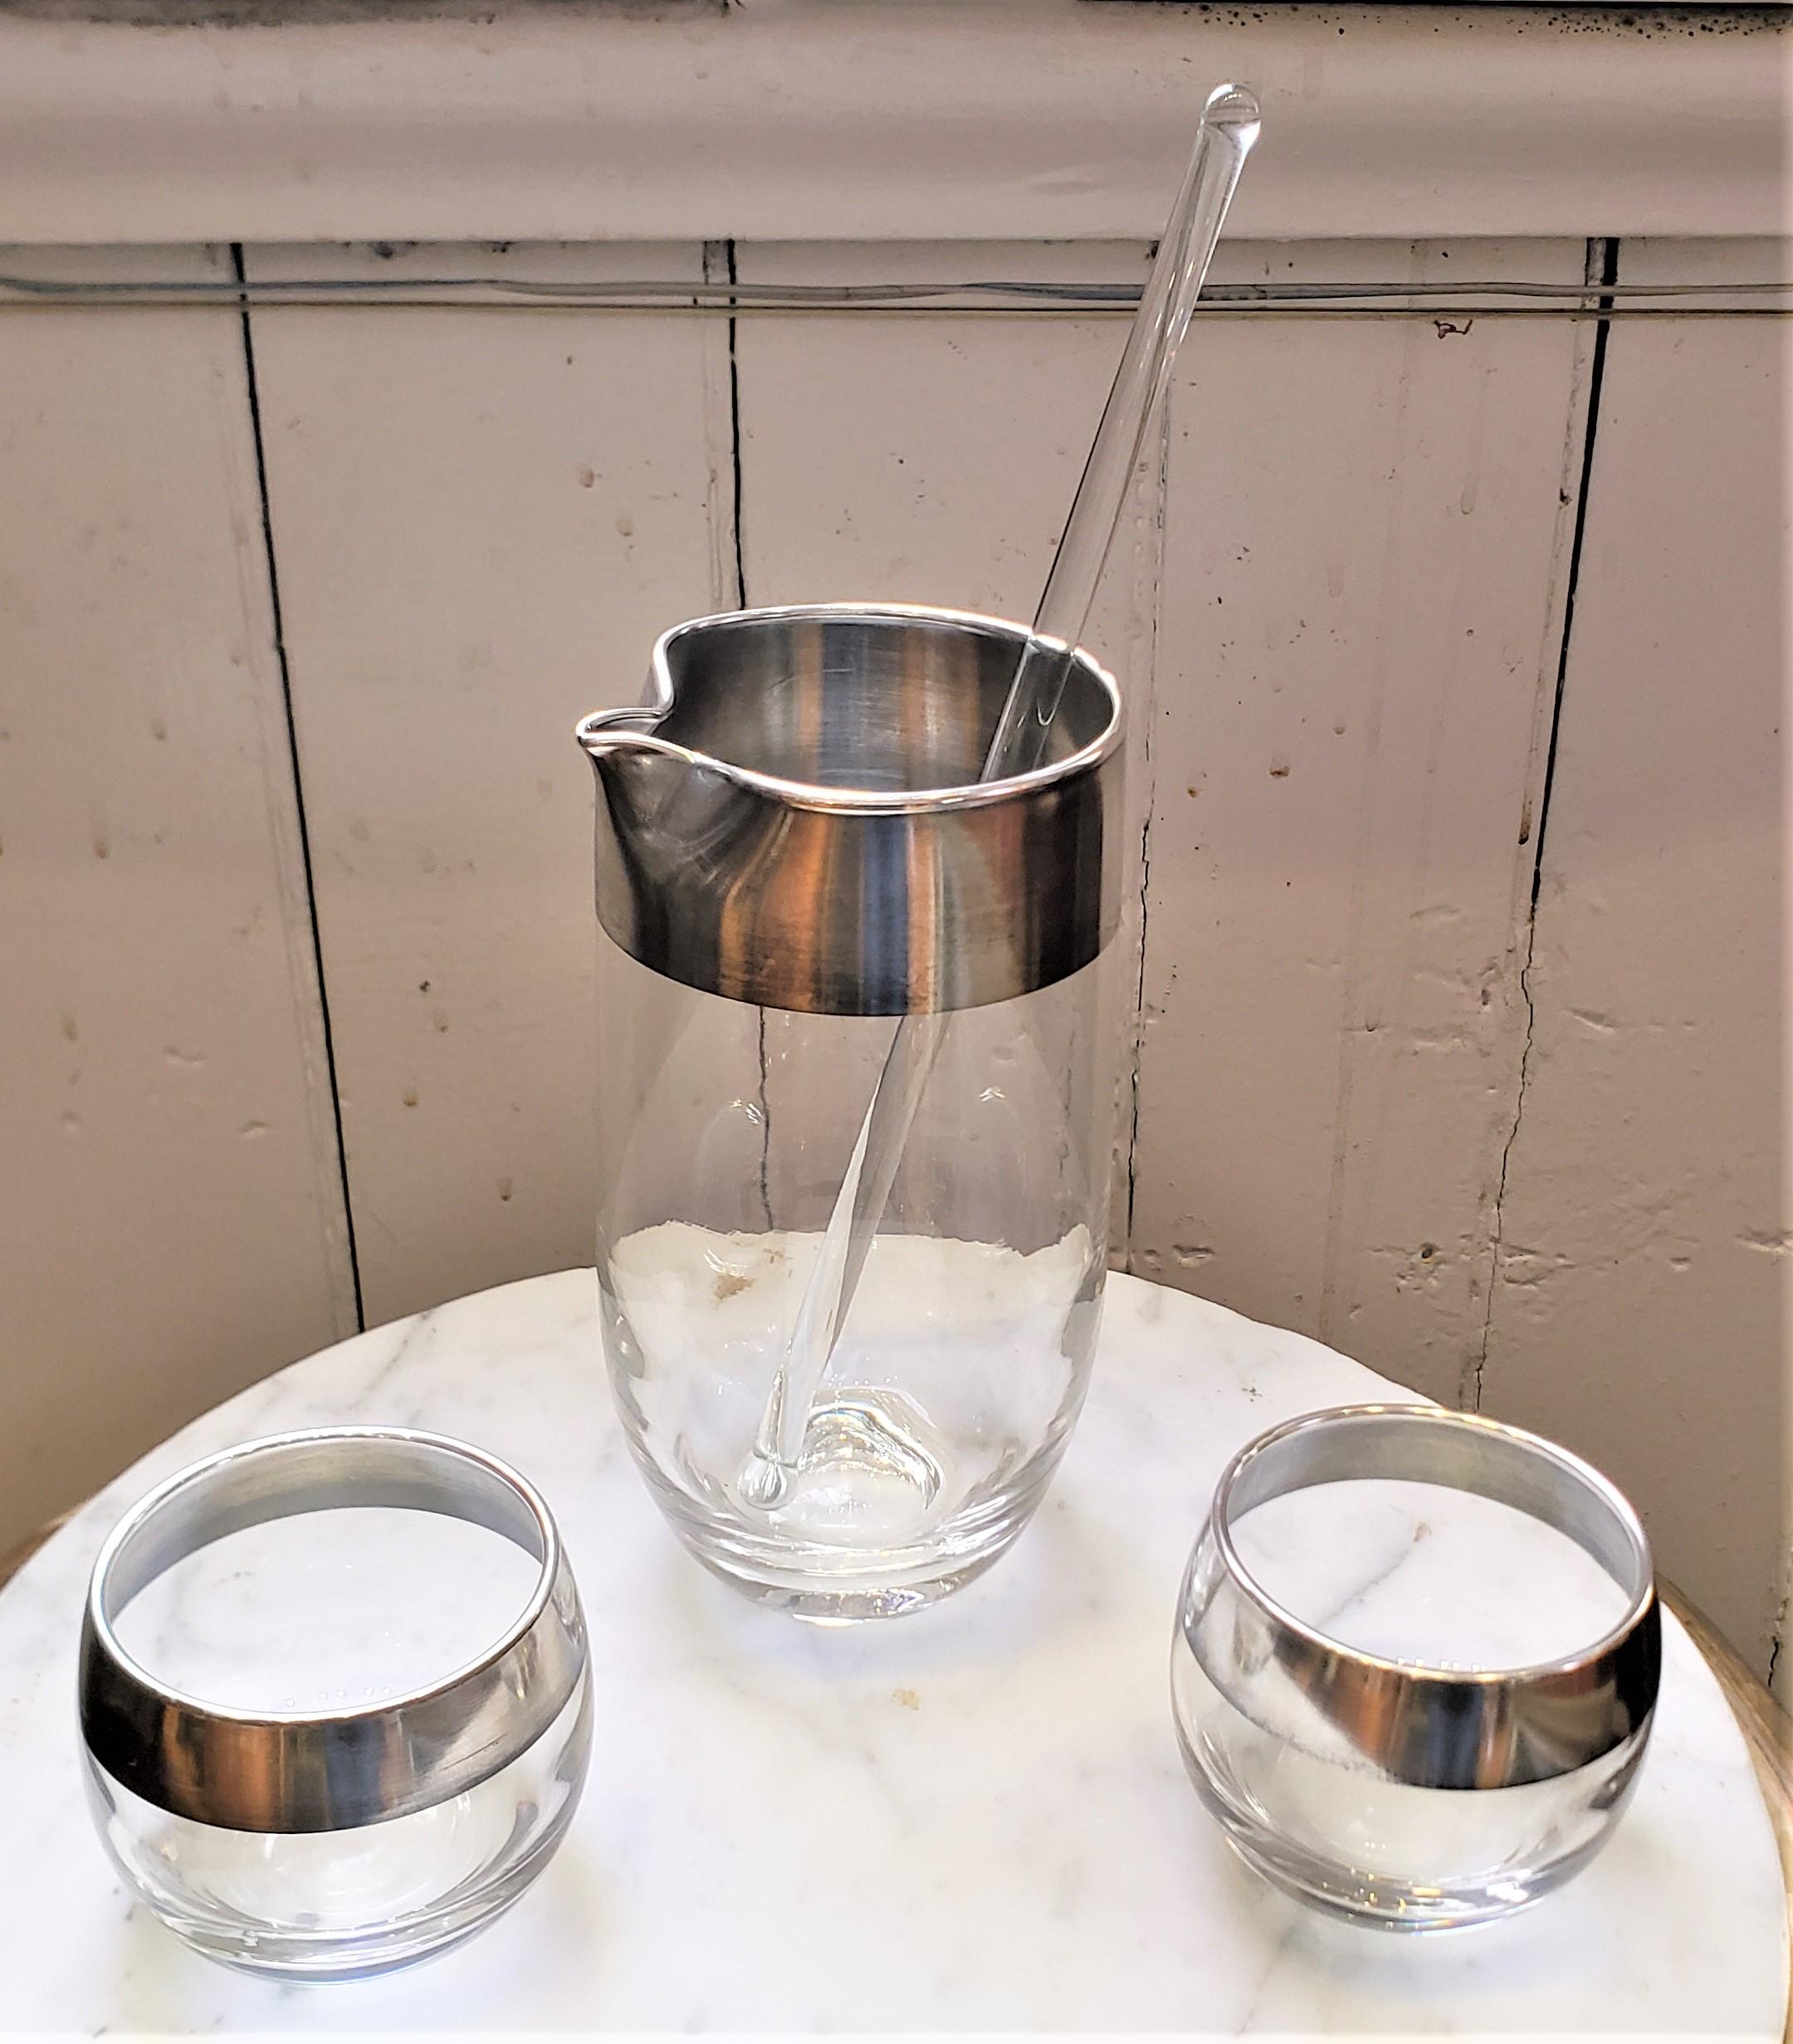 This four piece cocktail pitcher and glass set was done by the well known Dorothy Thorpe of the United States in approximately 1965 in the period Mid-Century style. The set is composed of a cocktail pitcher, glass stir stick, and two of her